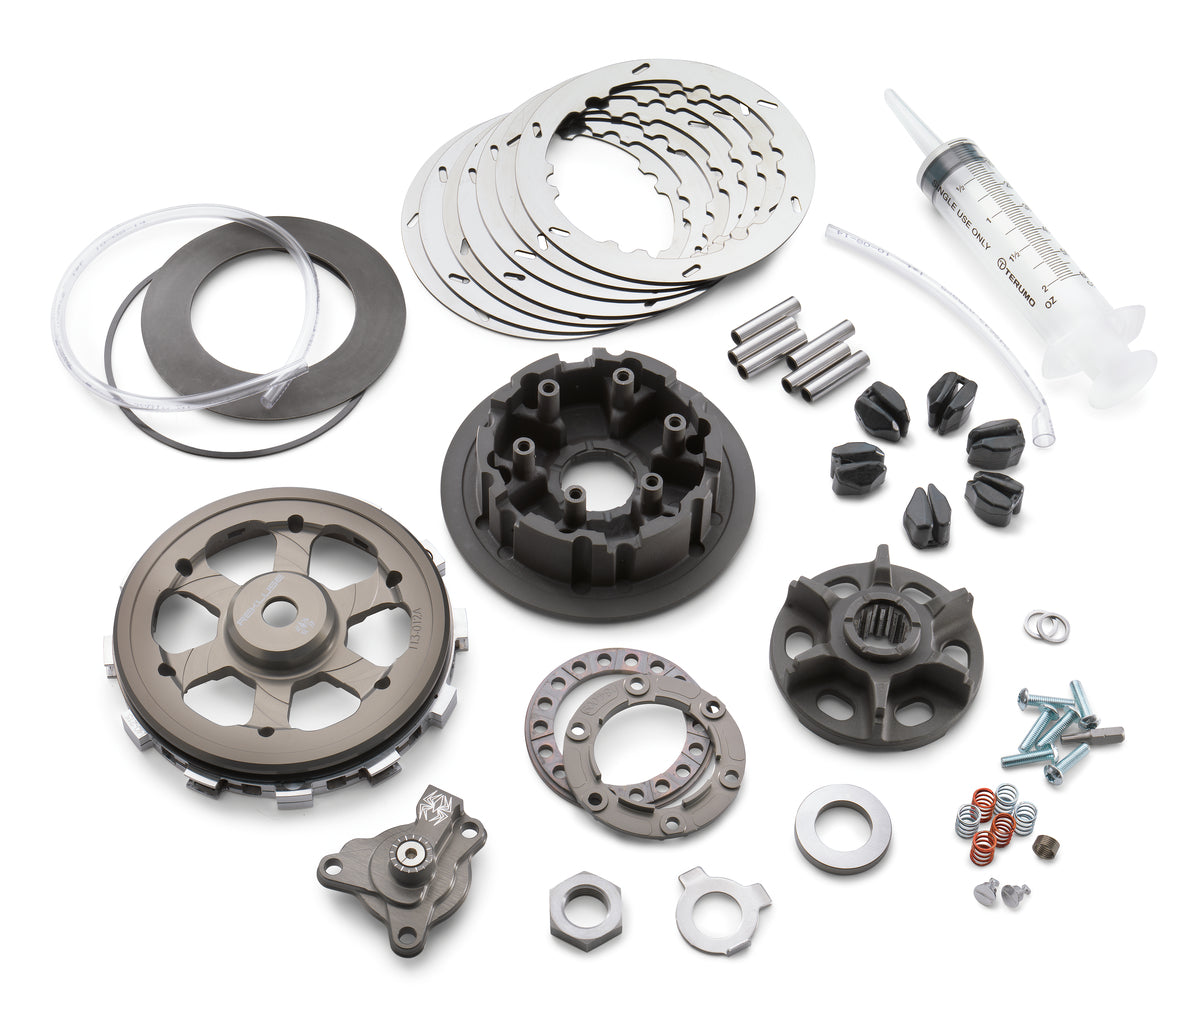 Rekluse EXP 3.0 centrifugal force clutch kit